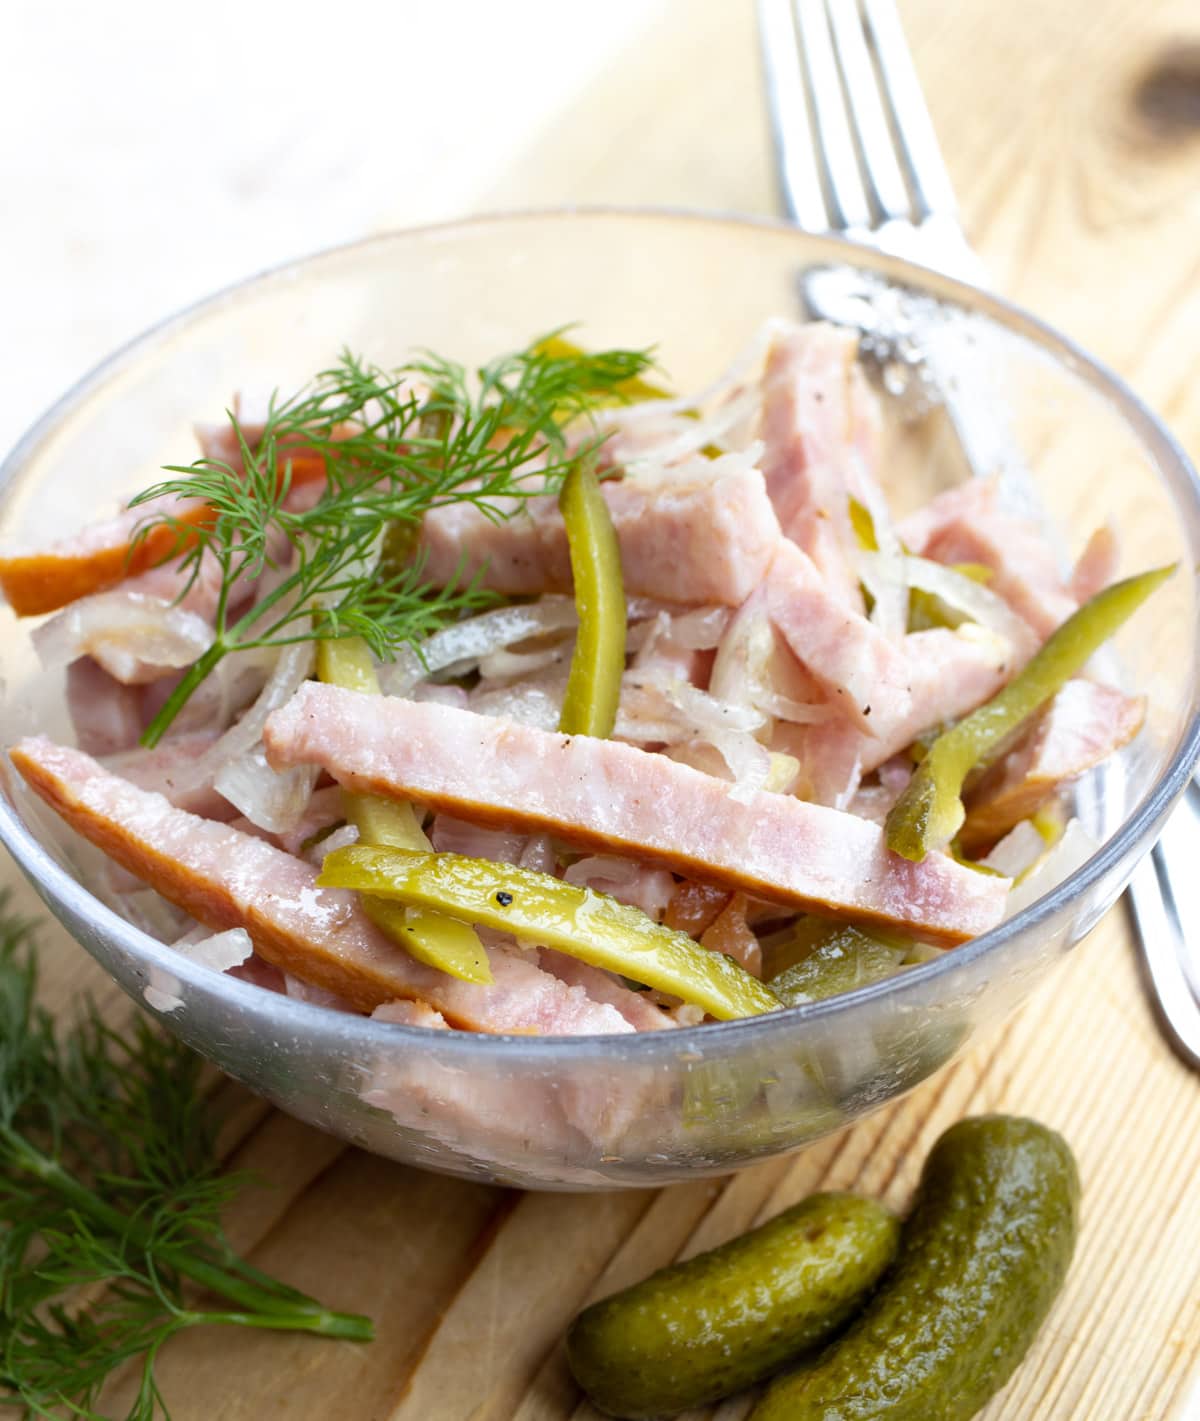 A salad made with sliced sausage, pickles, onion and topped with fresh dill.